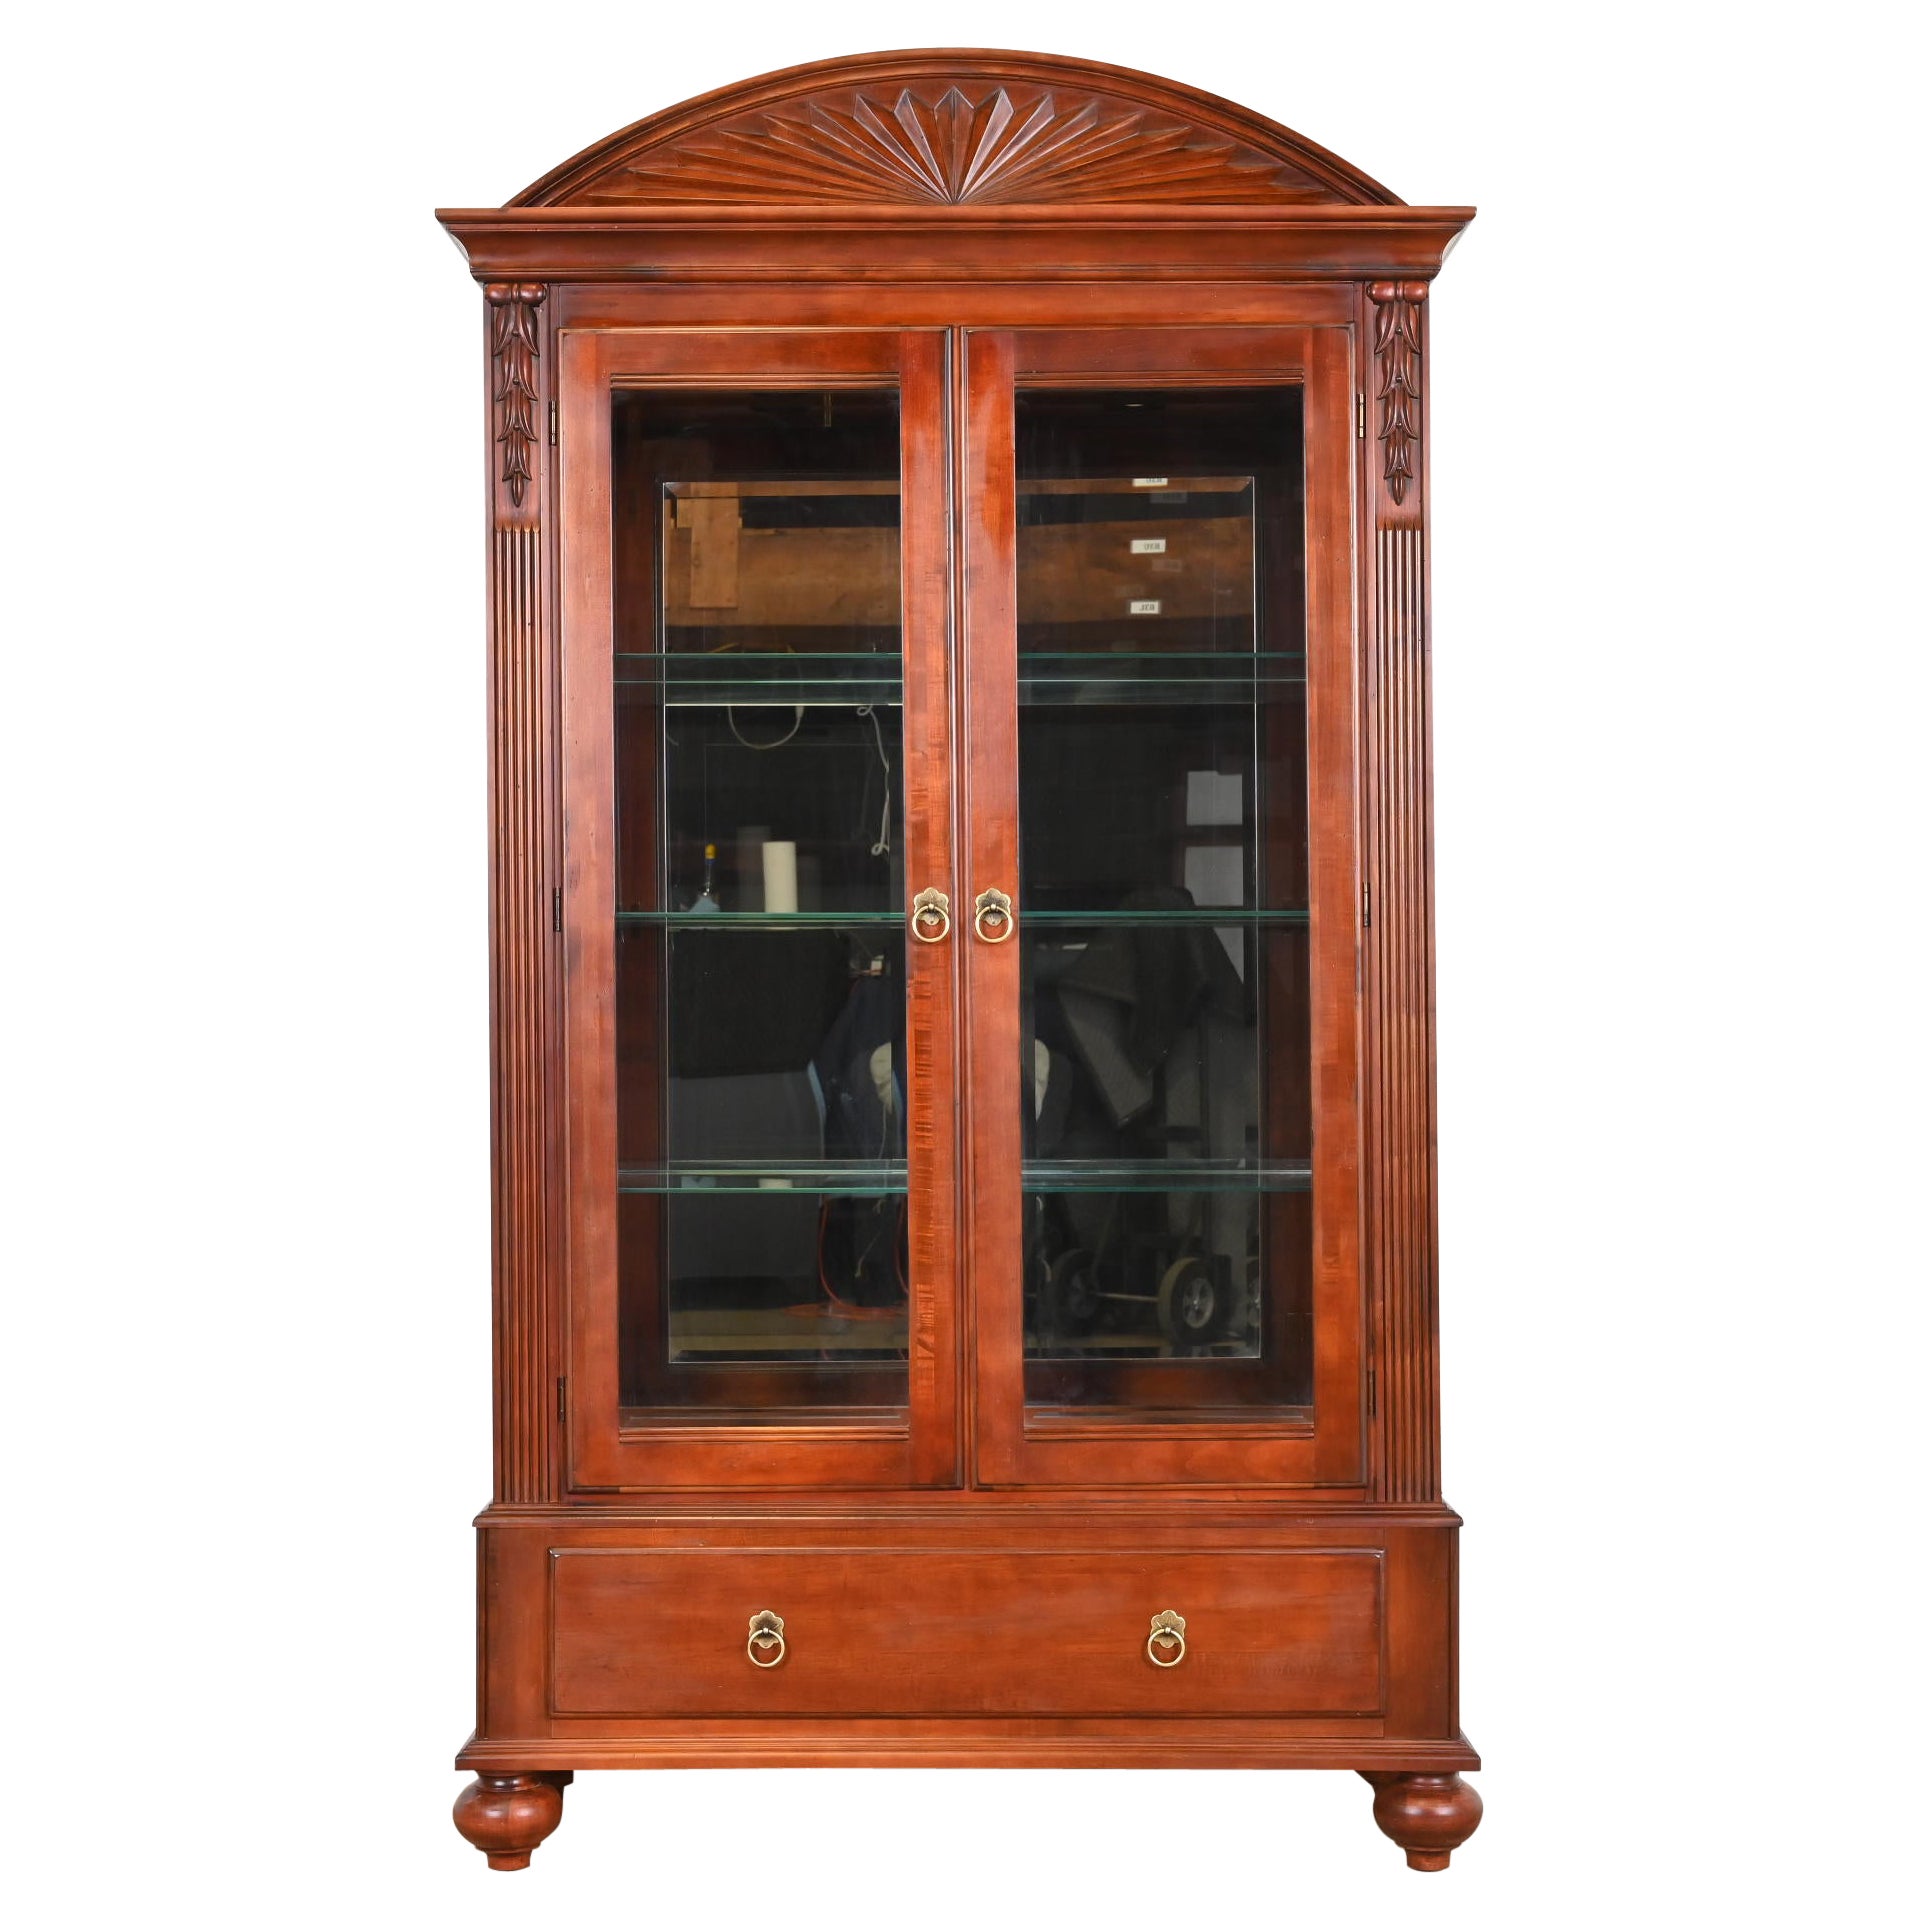 Ethan Allen British Colonial Cherry Wood Lighted Bookcase or Display Cabinet